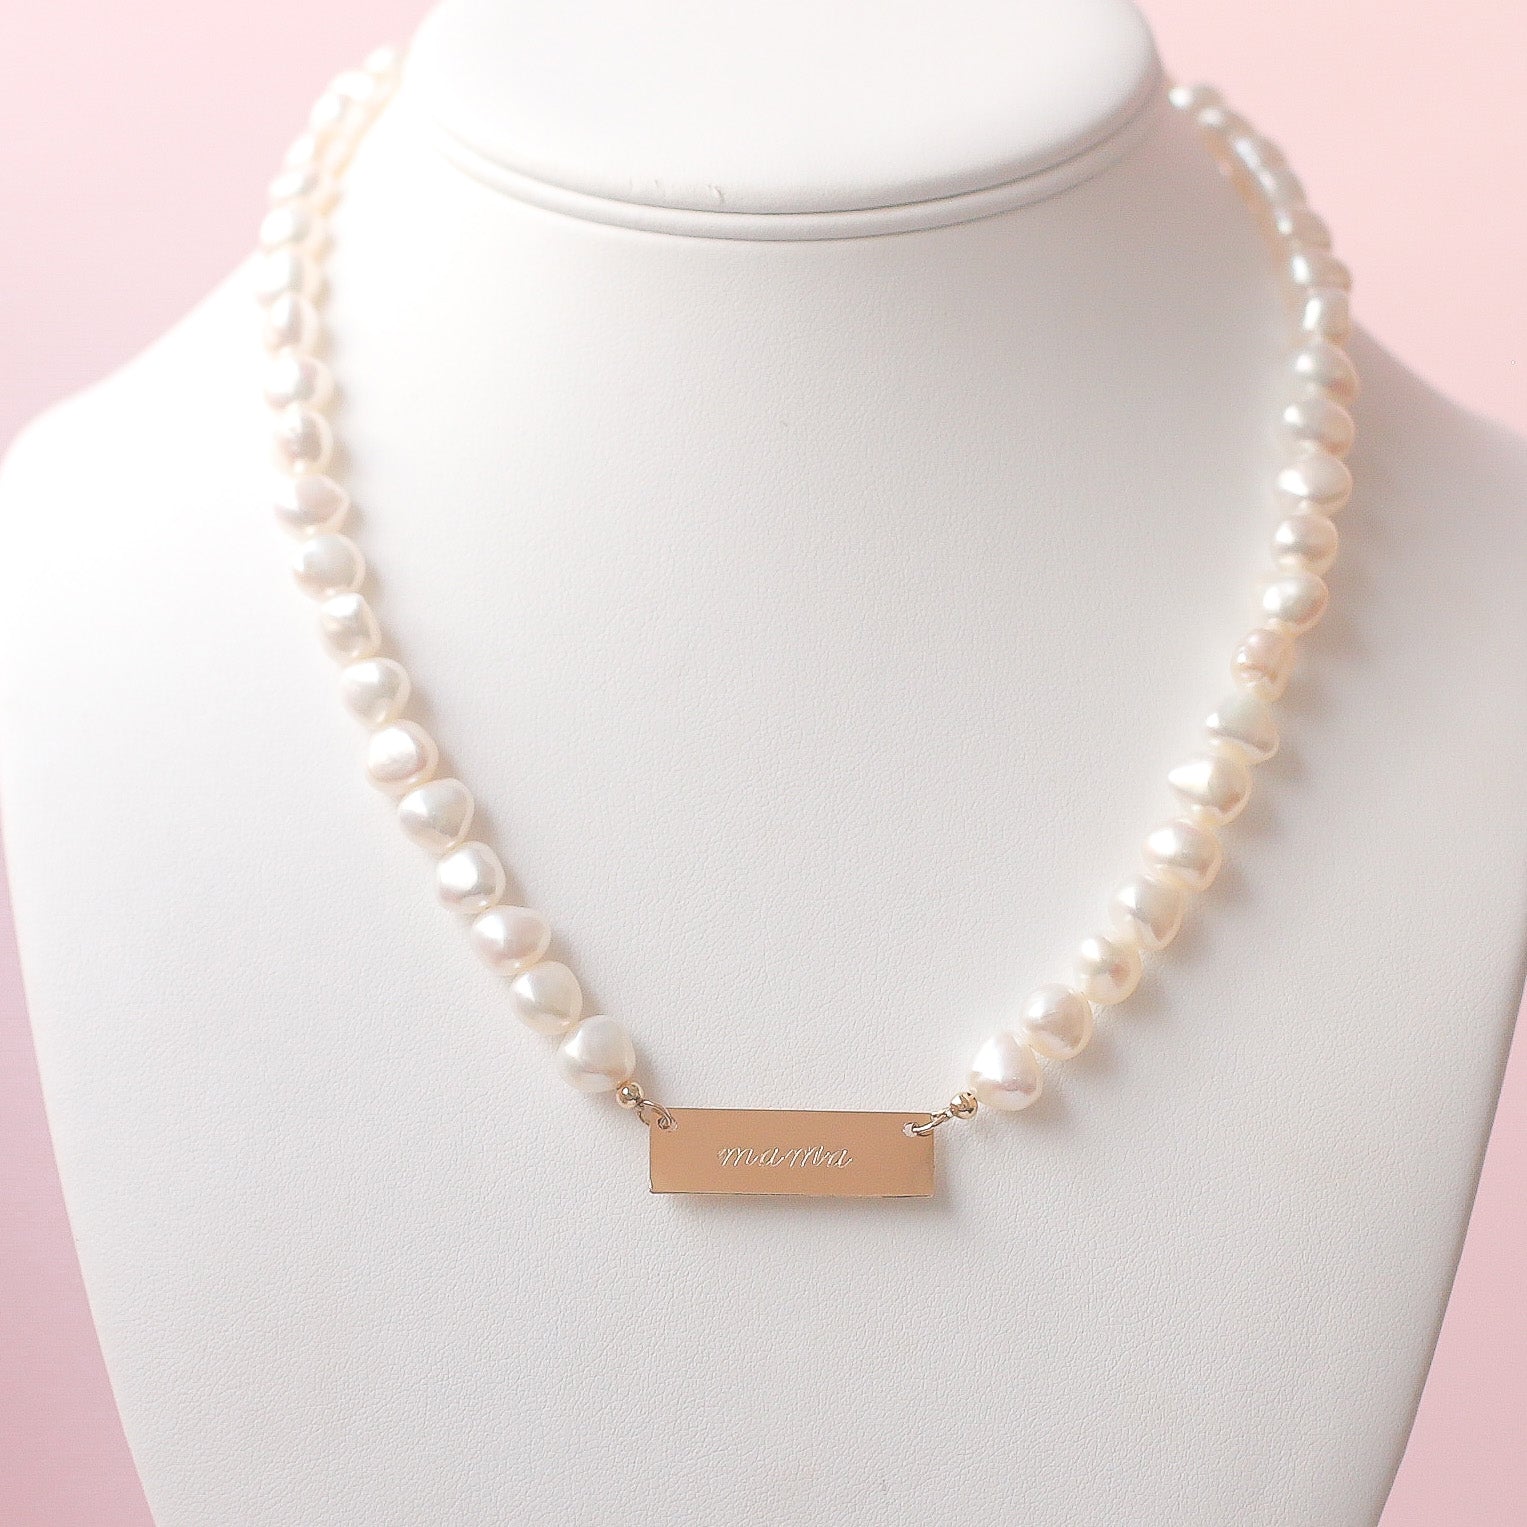 taudrey Perfectly Imperfect Plate Necklace